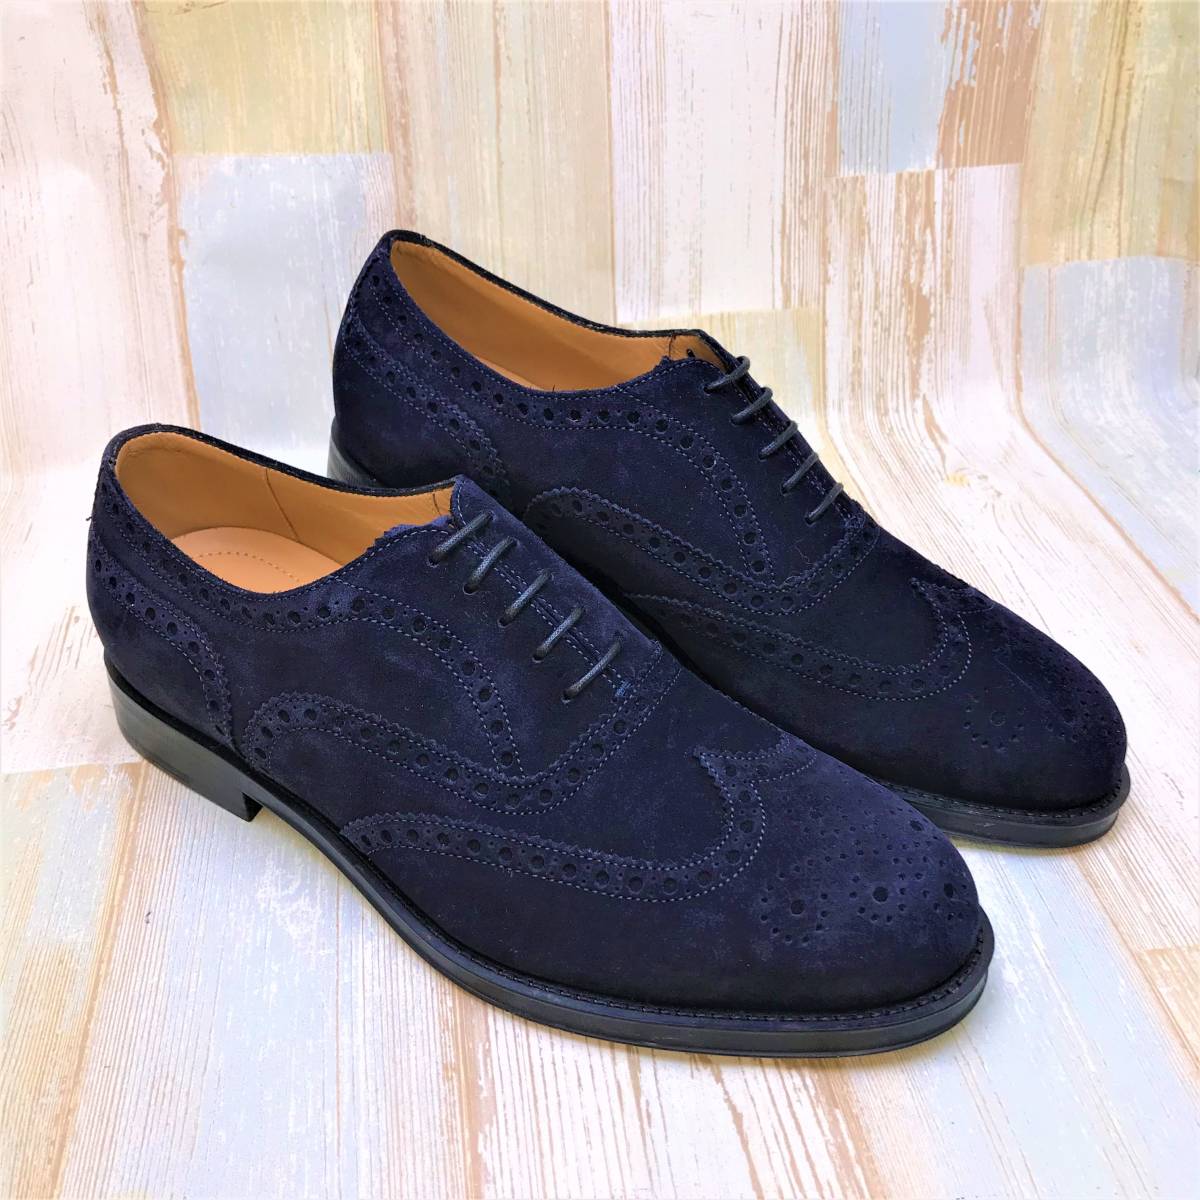  new goods *GIORGIO ARMANIjoru geo Armani wing chip suede shoes shoes navy navy blue color leather * approximately 24.5cm US6.5 size 40.5